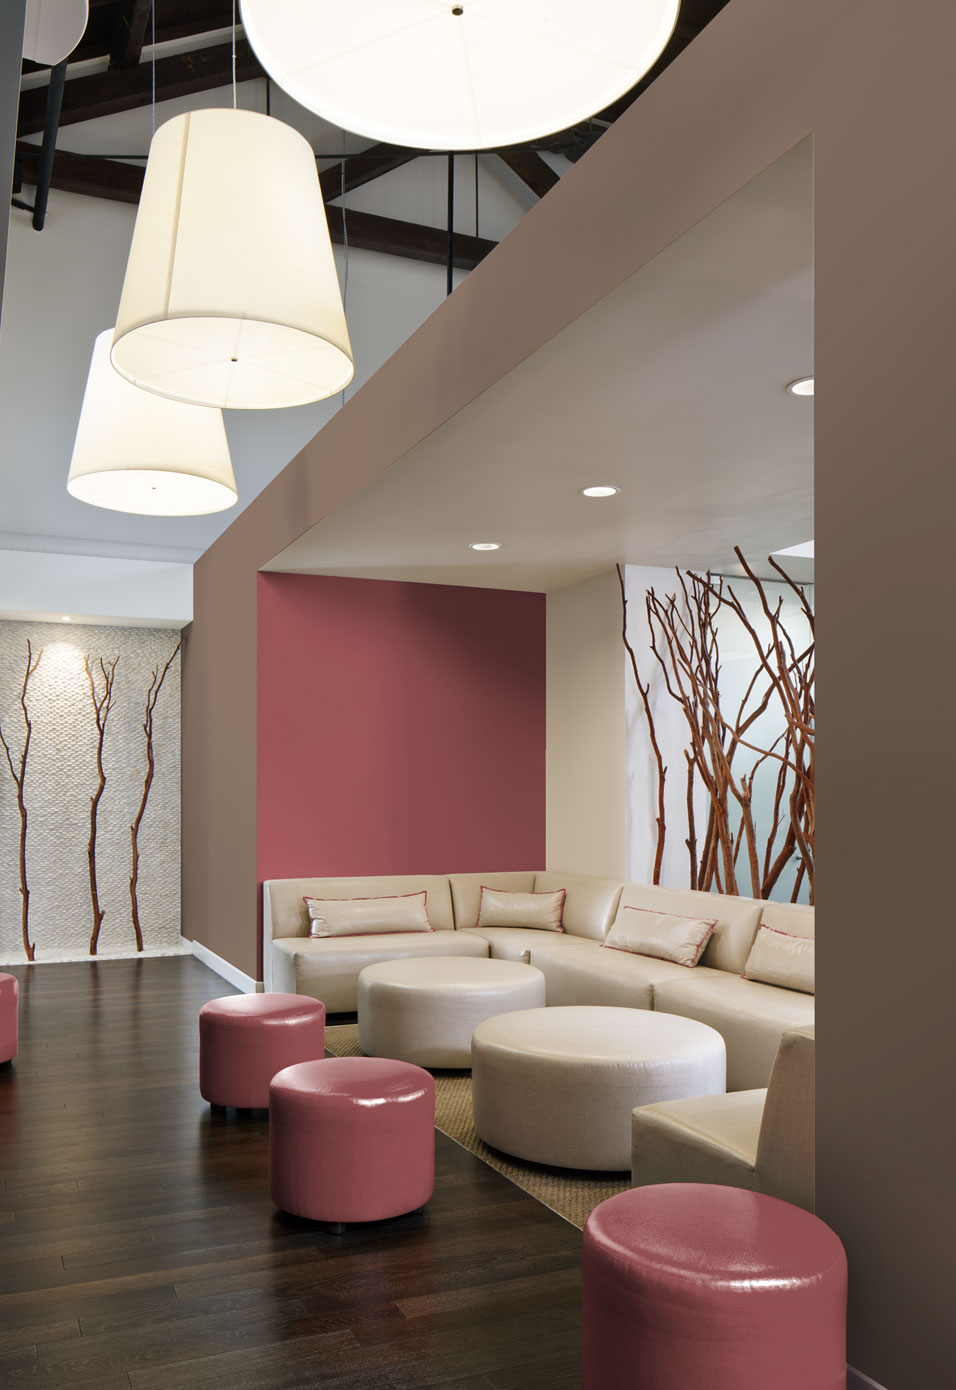 A lobby area with seating and ottoman mobile.
Lingonberry Punch M150-6
